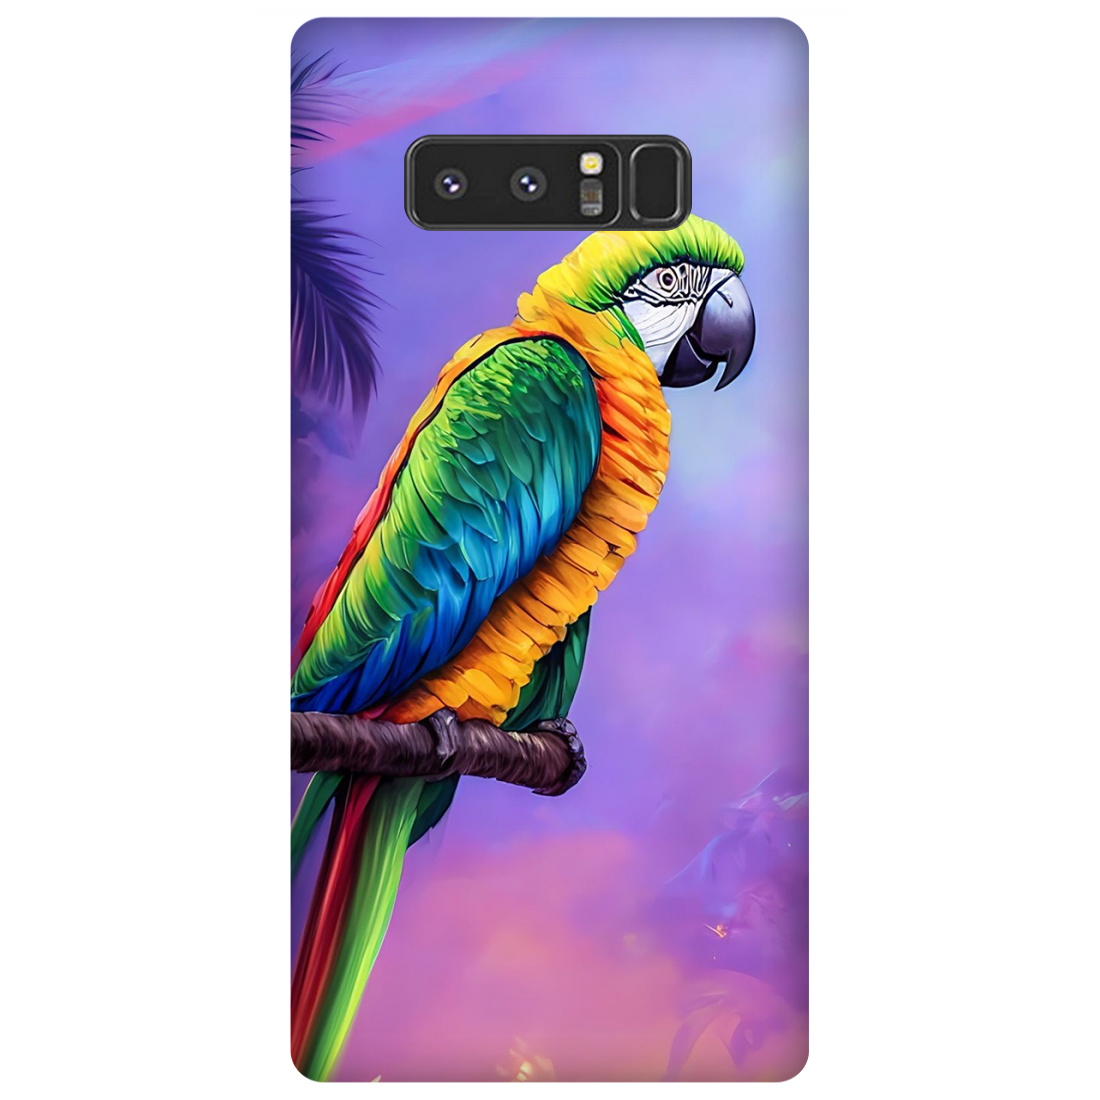 Vibrant Parrot in an Ethereal Atmosphere Case Samsung Galaxy Note 8